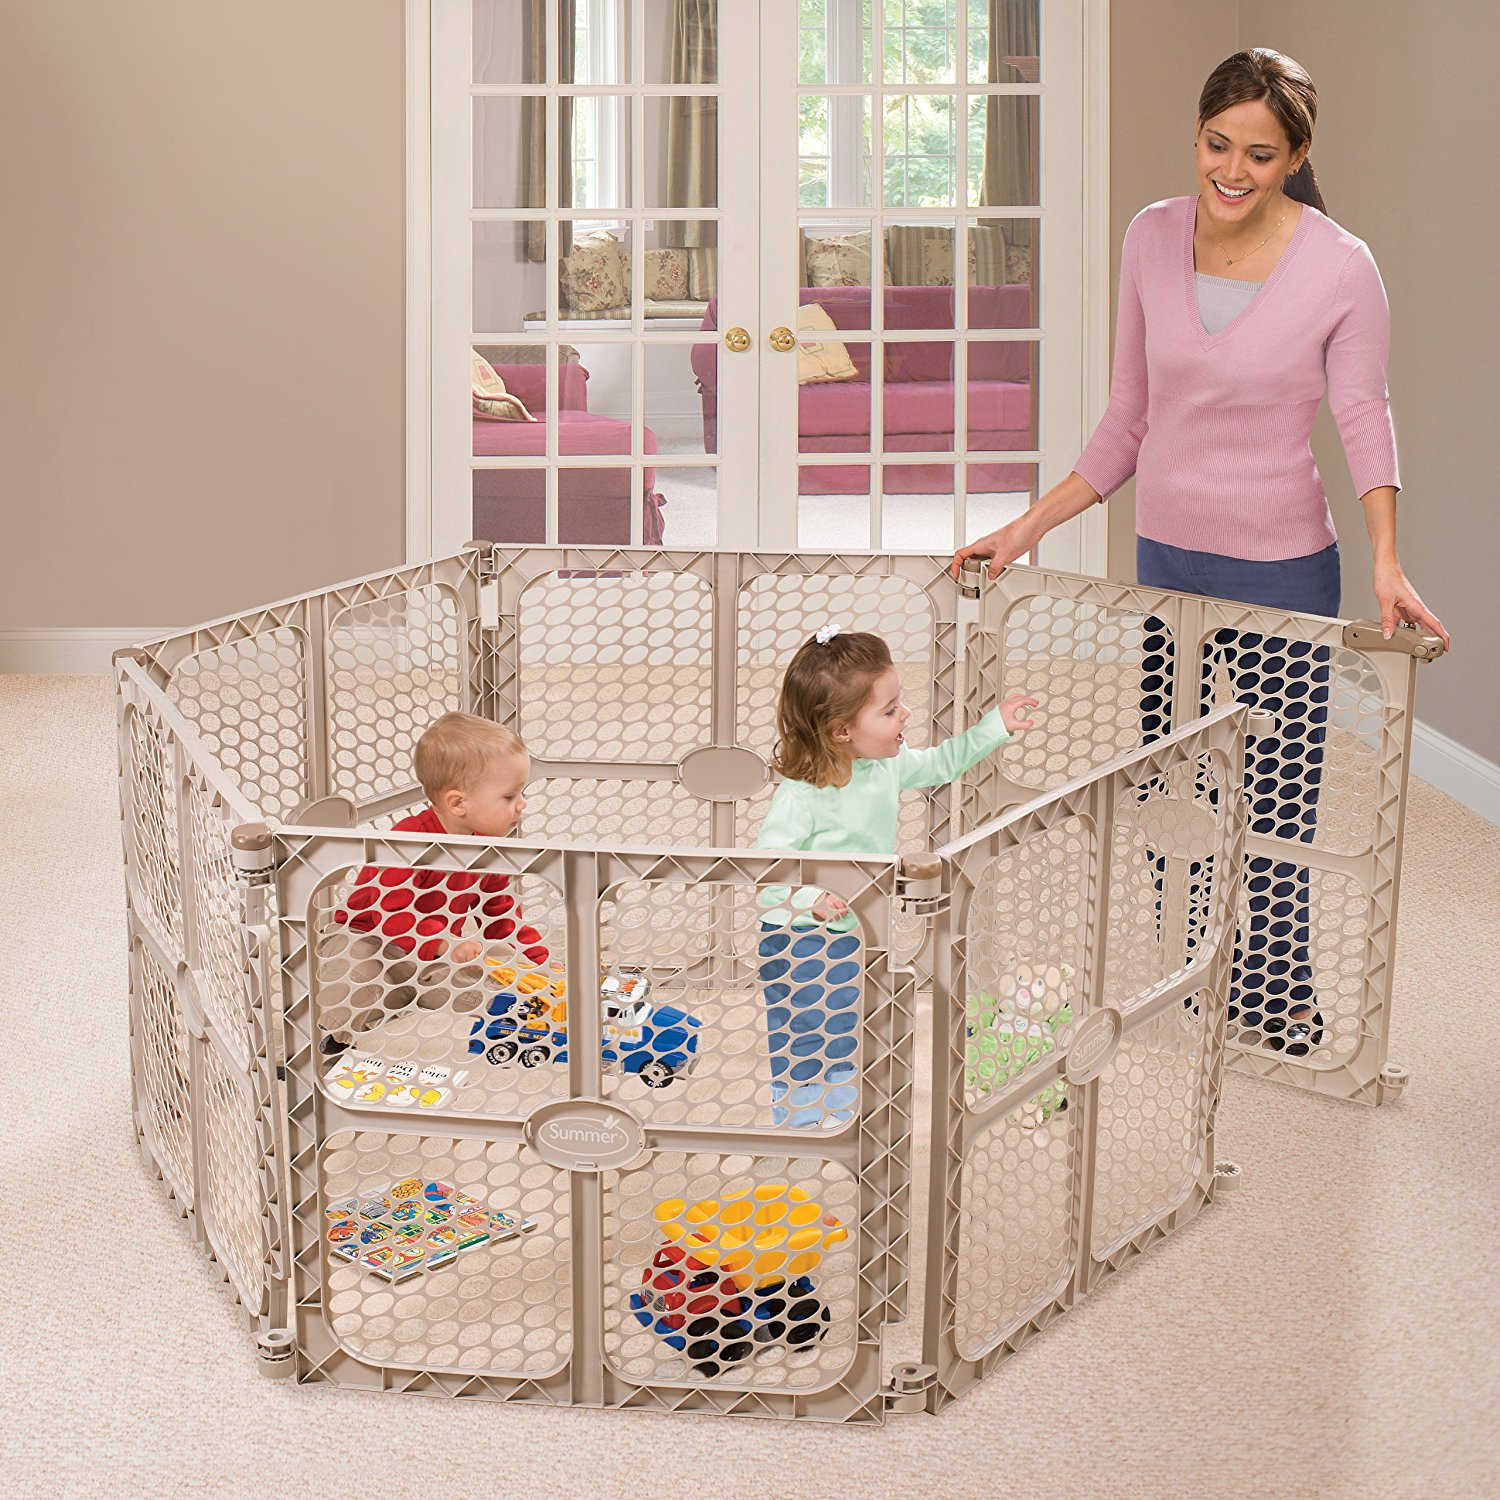 Summer Infant Secure Surround 6-Panel PlaySafe Playard Only $48.59 For Prime Members!